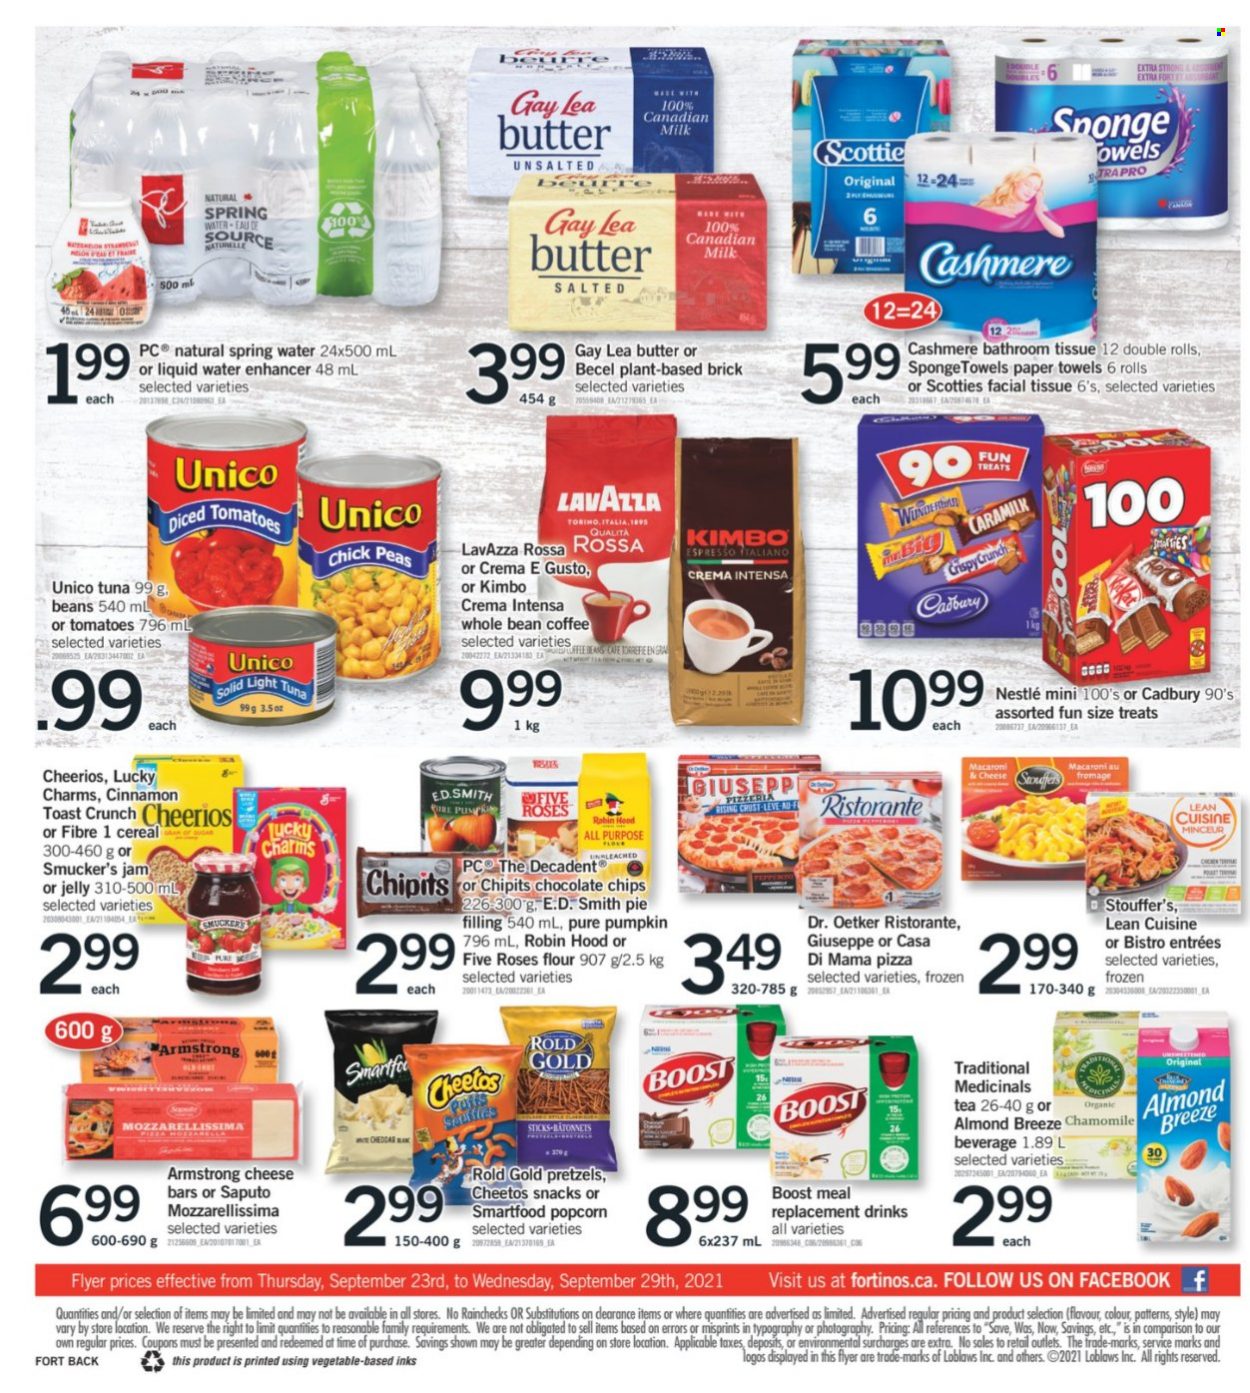 thumbnail - Fortinos Flyer - September 23, 2021 - September 29, 2021 - Sales products - pretzels, pumpkin, peas, tuna, macaroni & cheese, pizza, Lean Cuisine, Dr. Oetker, milk, Almond Breeze, butter, Stouffer's, snack, jelly, Cadbury, Cheetos, Smartfood, popcorn, flour, pie filling, light tuna, cereals, Cheerios, cinnamon, fruit jam, spring water, Boost, tea, coffee, Lavazza, bath tissue, kitchen towels, paper towels, Nestlé. Page 2.